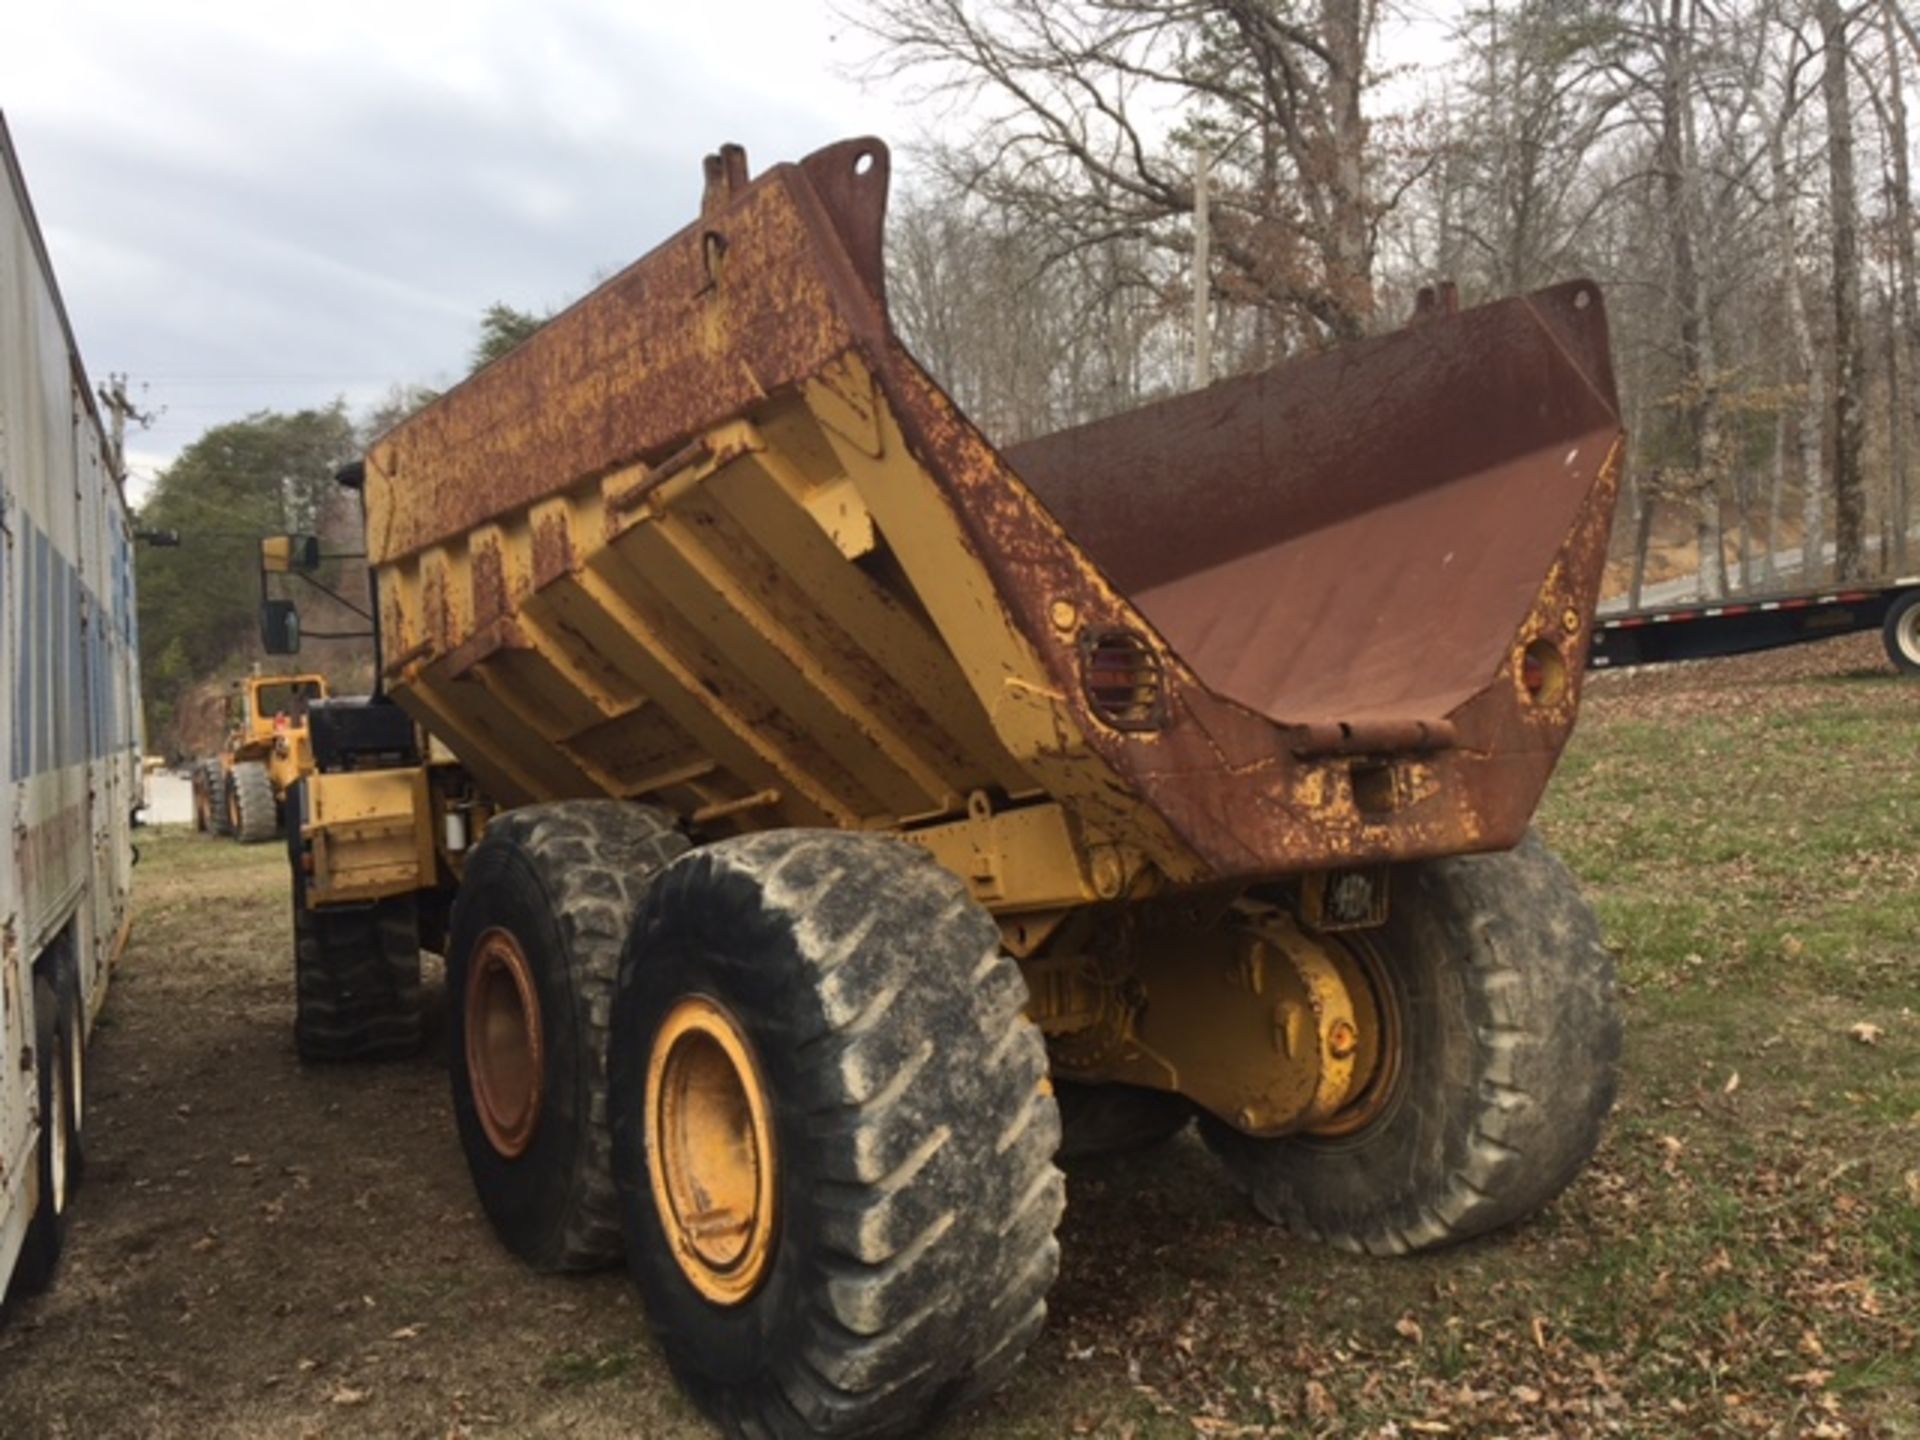 1994 Moxy, MT30 S-3 Articulating Dump Truck, 30 Ton, 15,650 hrs., 23.5-25 Tires, S/N 352124, - Image 4 of 4